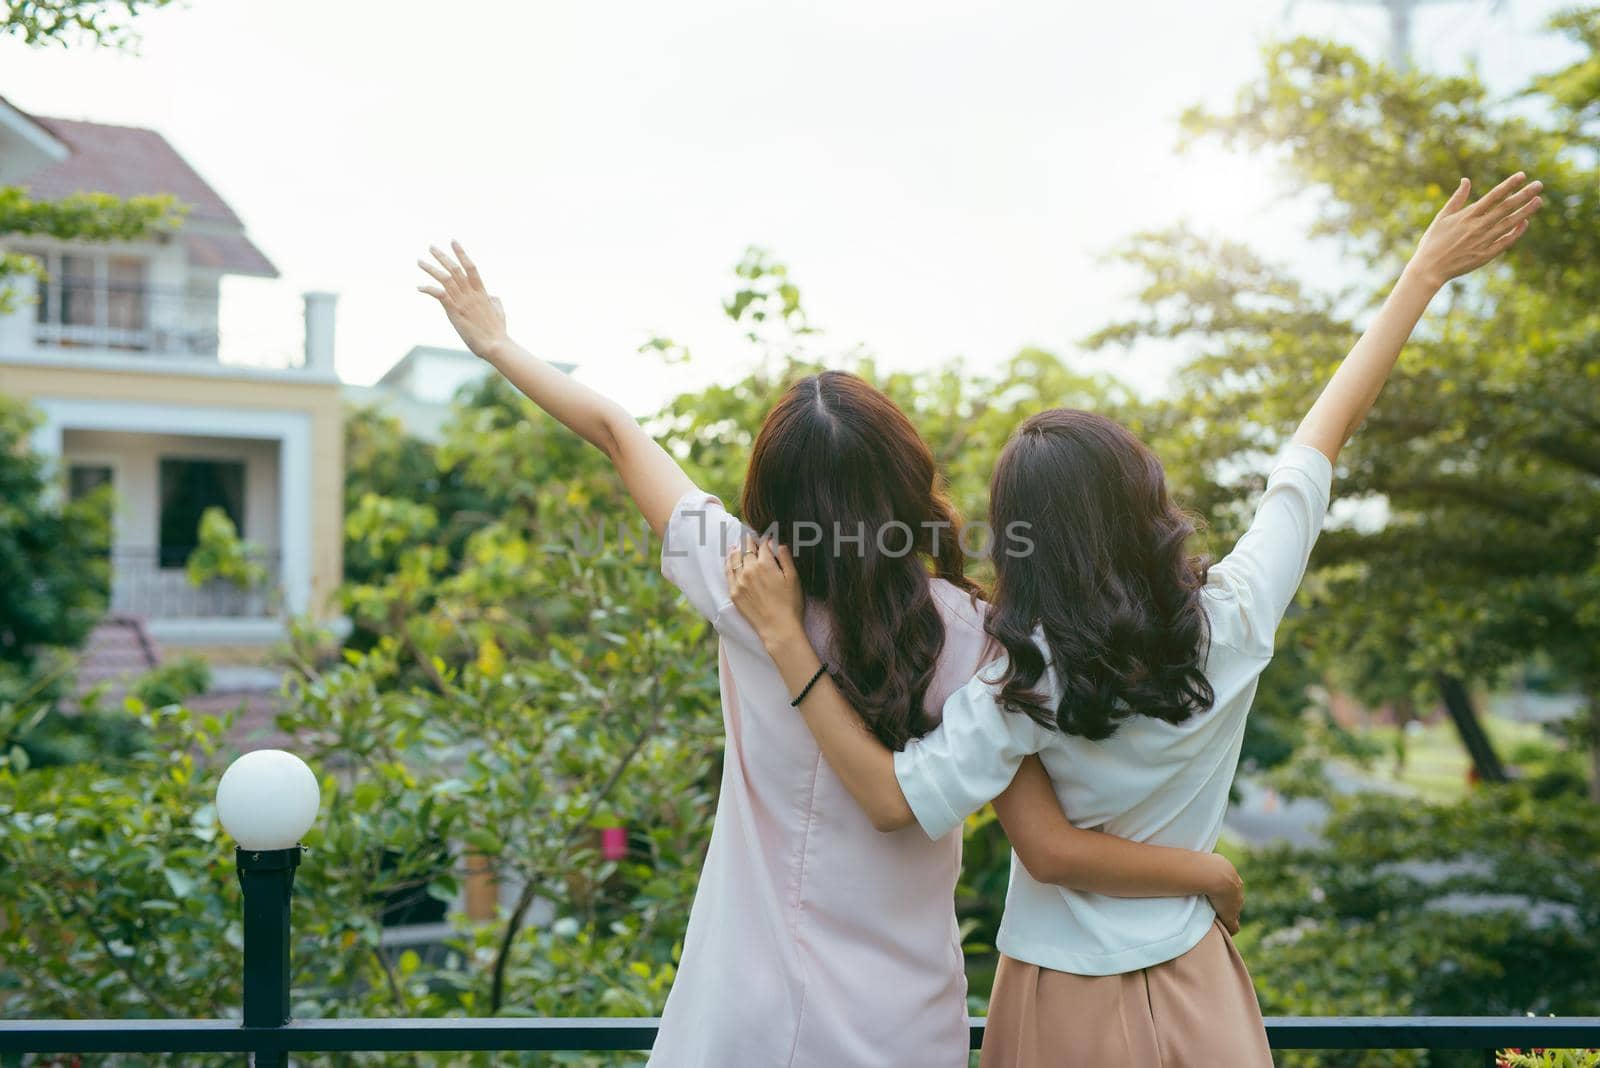 Outdoor fashion portrait of best girl friends posing back and hugs, both wearing stylish trendy hipster retro dresses. Enjoy their friendship and great time together.